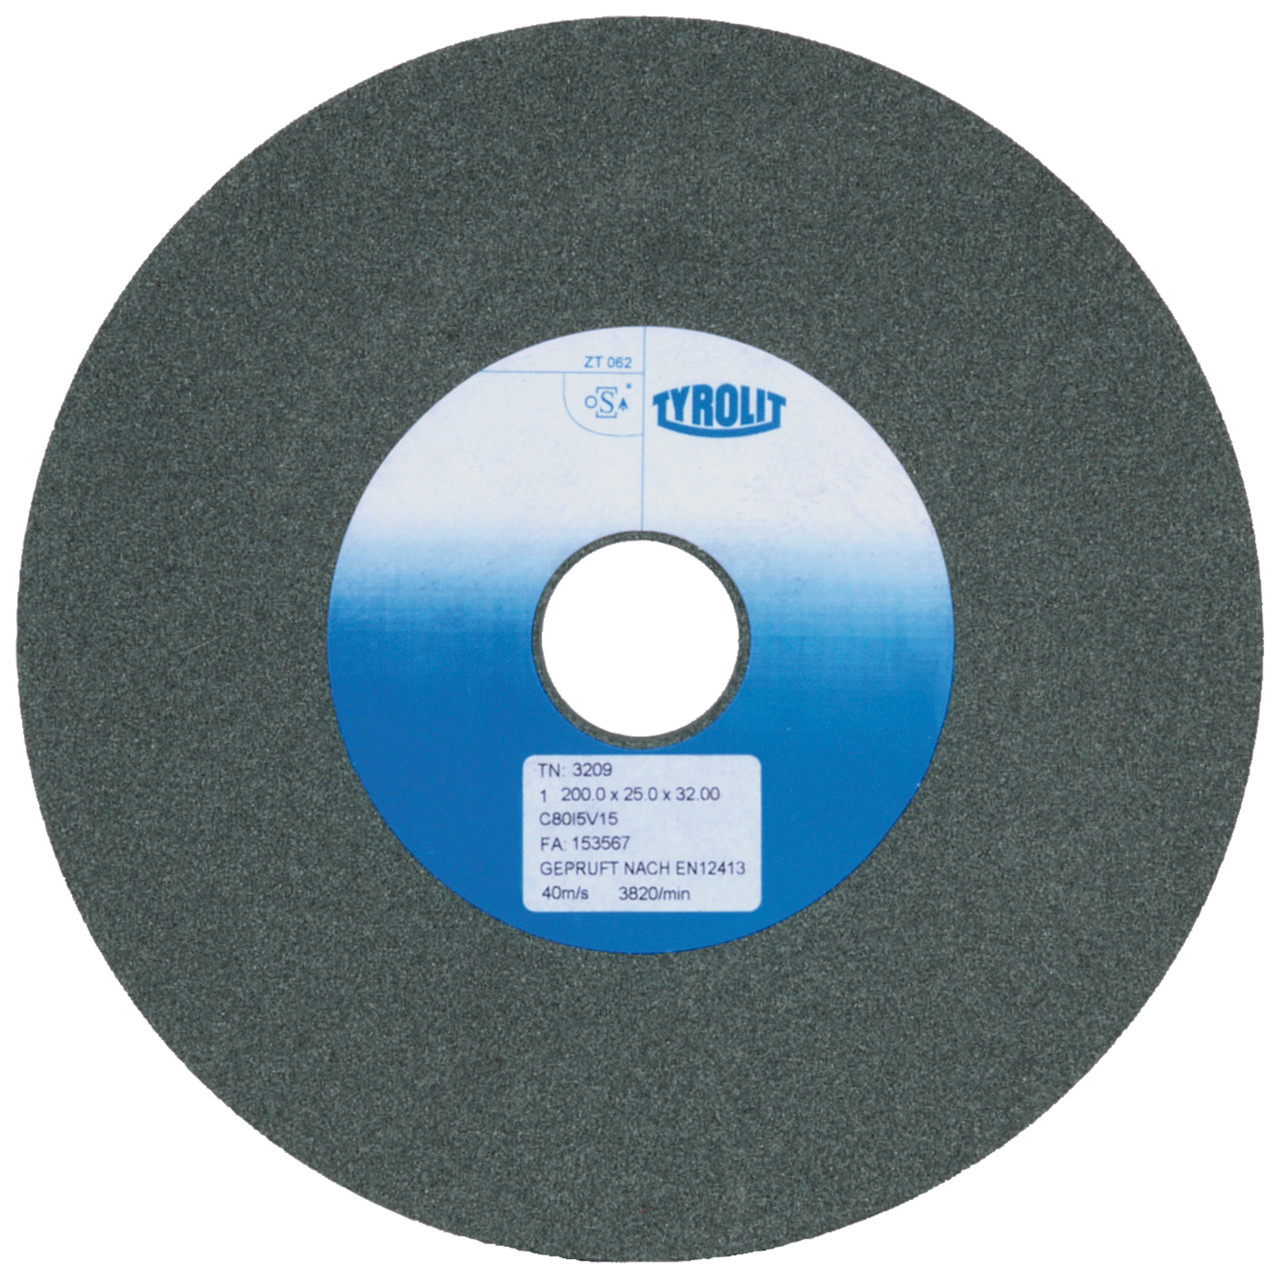 Tyrolit Conventional ceramic grinding discs DxDxH 150x25x32 For carbide and cast iron, shape: 1, Art. 2751